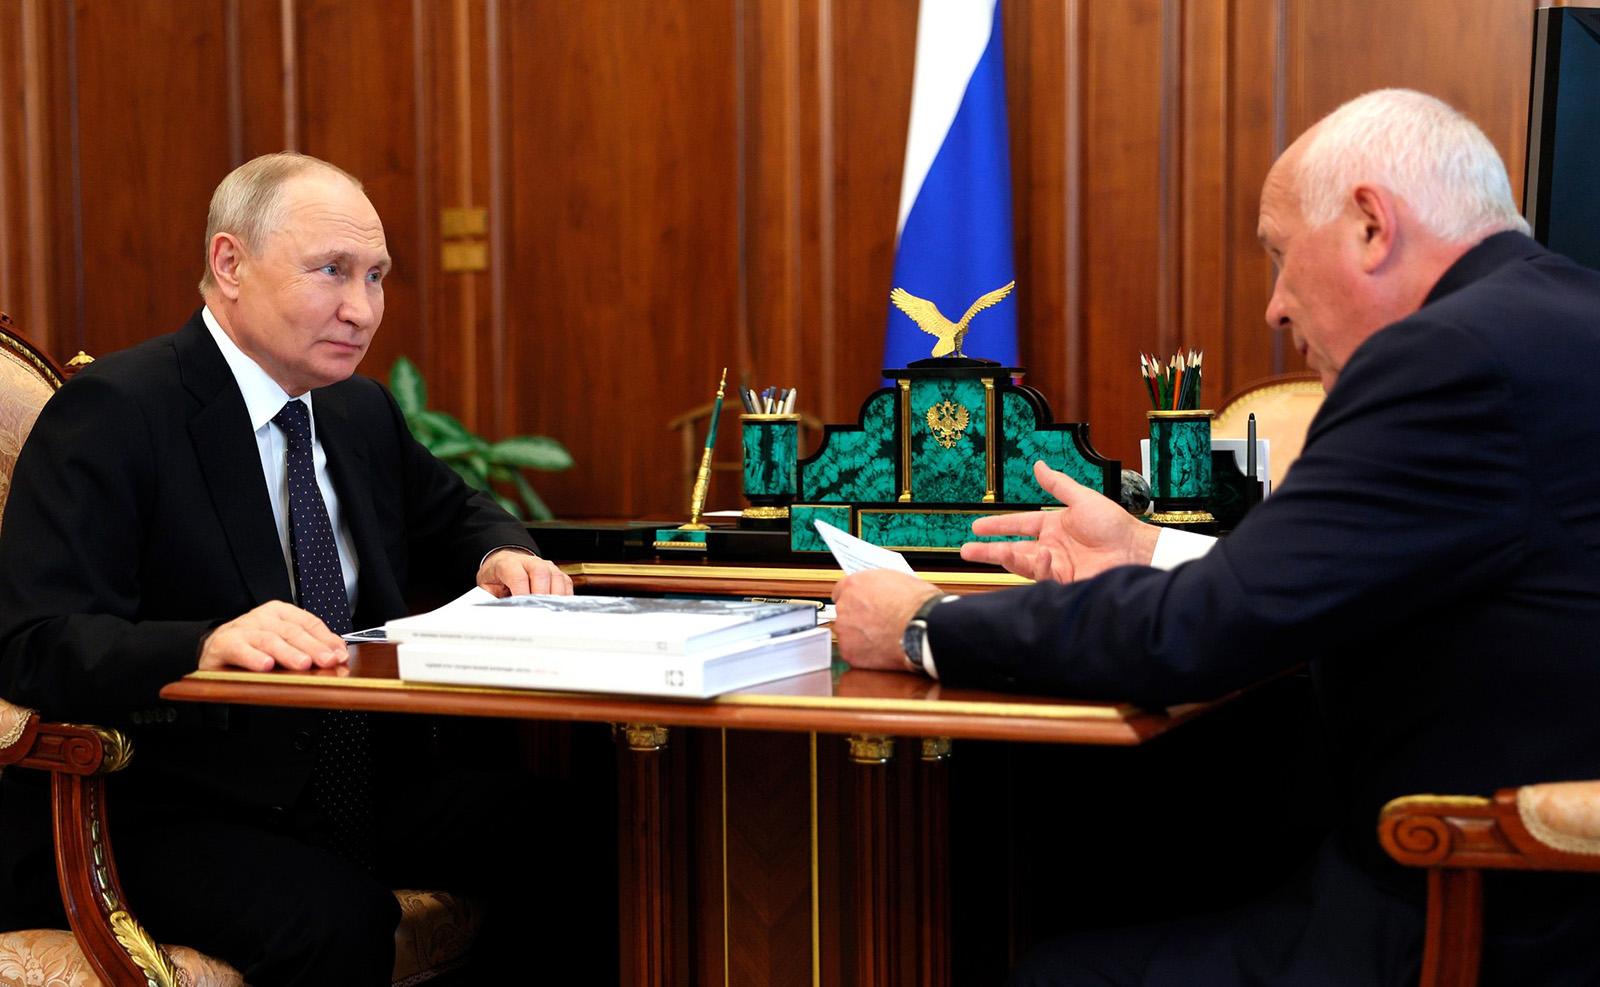 Russian President Vladimir Putin holds a meeting with CEO of Rostec State Corporation Sergei Chemezov at the Kremlin in Moscow, Russia, on August 7.